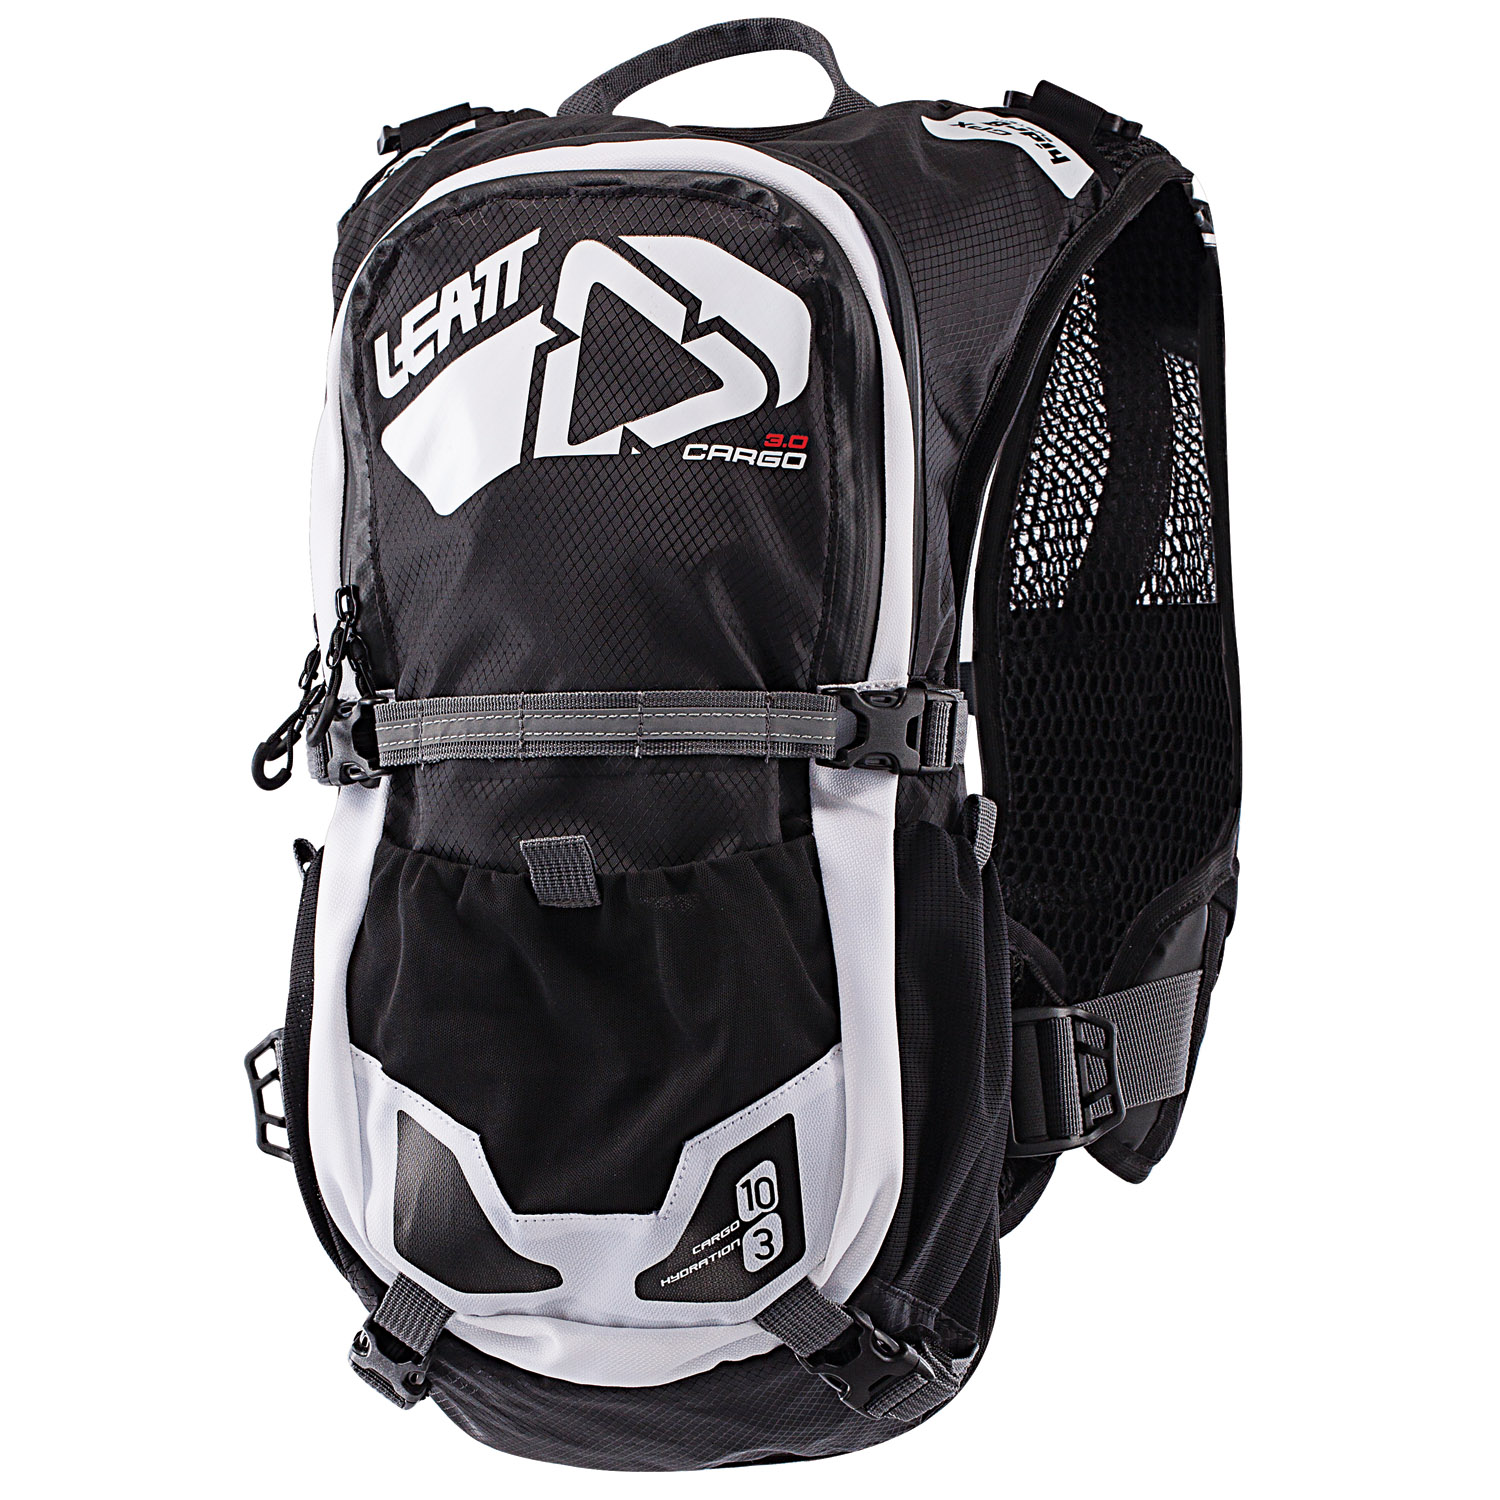 Leatt Backpack with Hydration System GPX Cargo 3.0 Incl. Back Protector, Black/White, 3 L